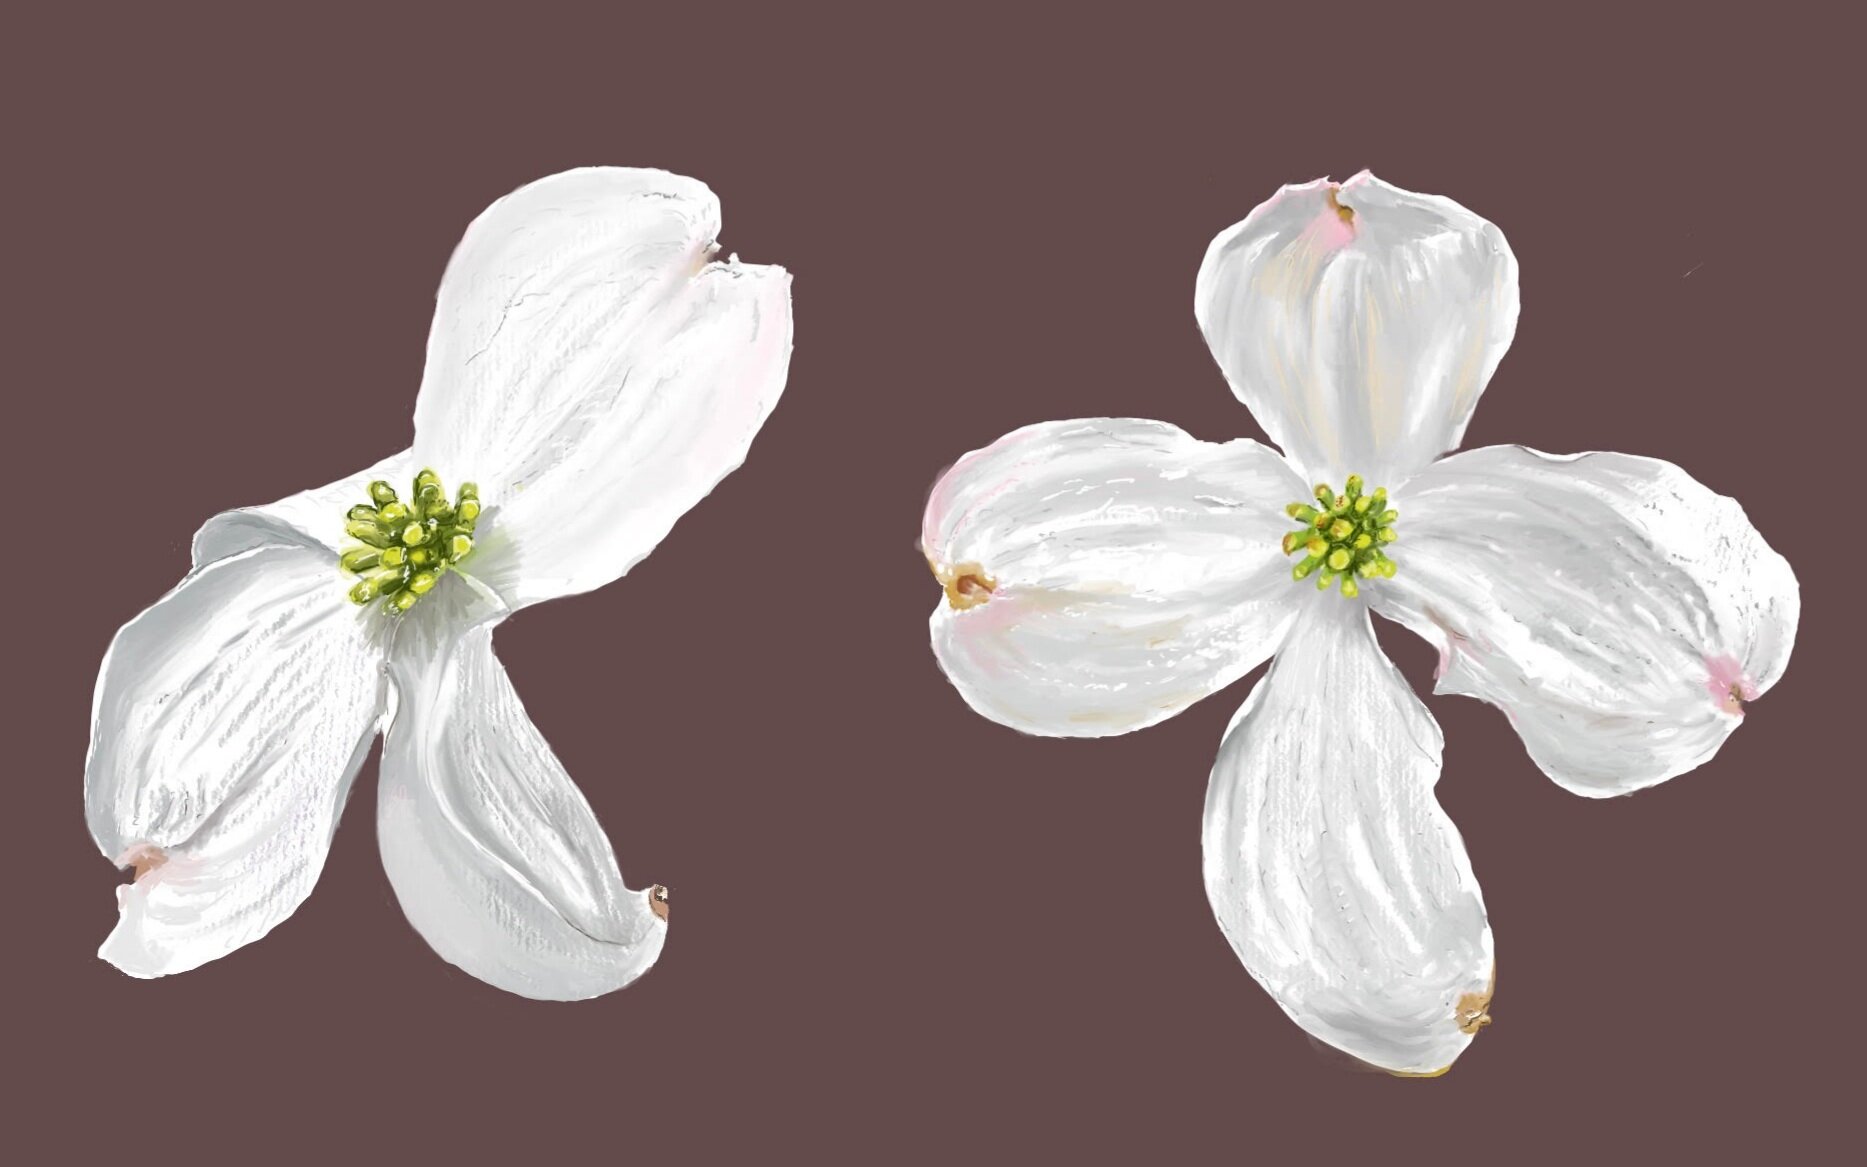 Dogwood Blossoms; 2021, painted with Procreate